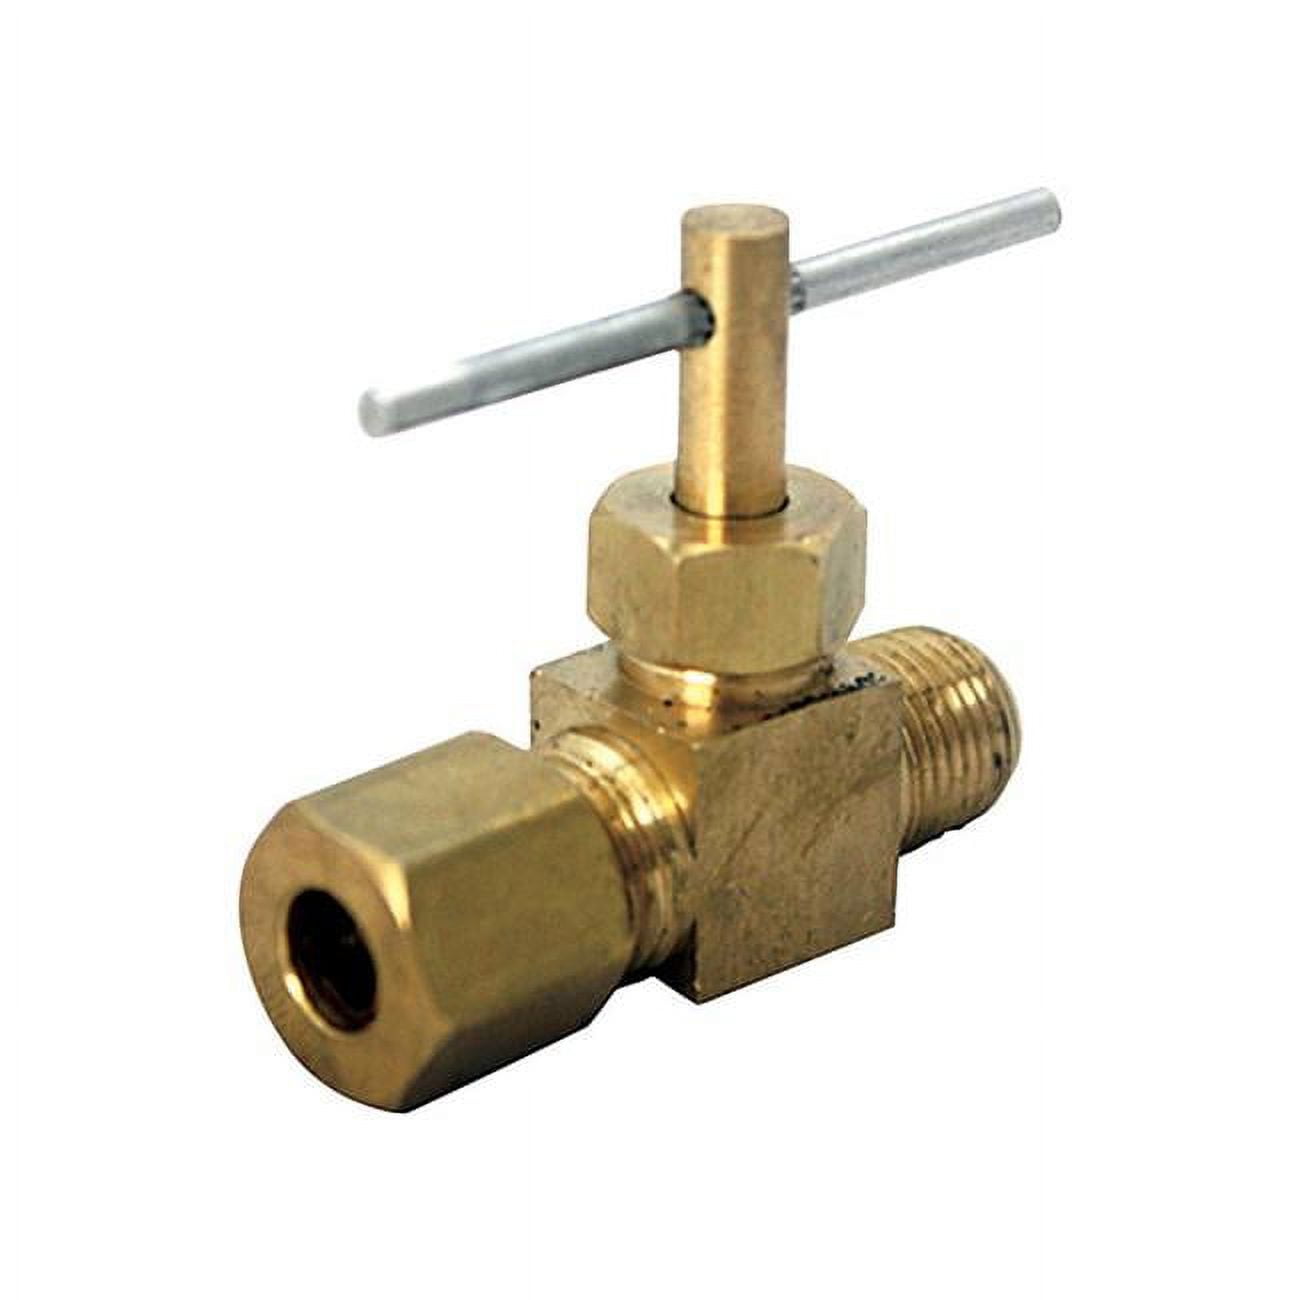 0.37 X 0.25 In. Dia. Brass Straight Needle Valve- Pack Of 5